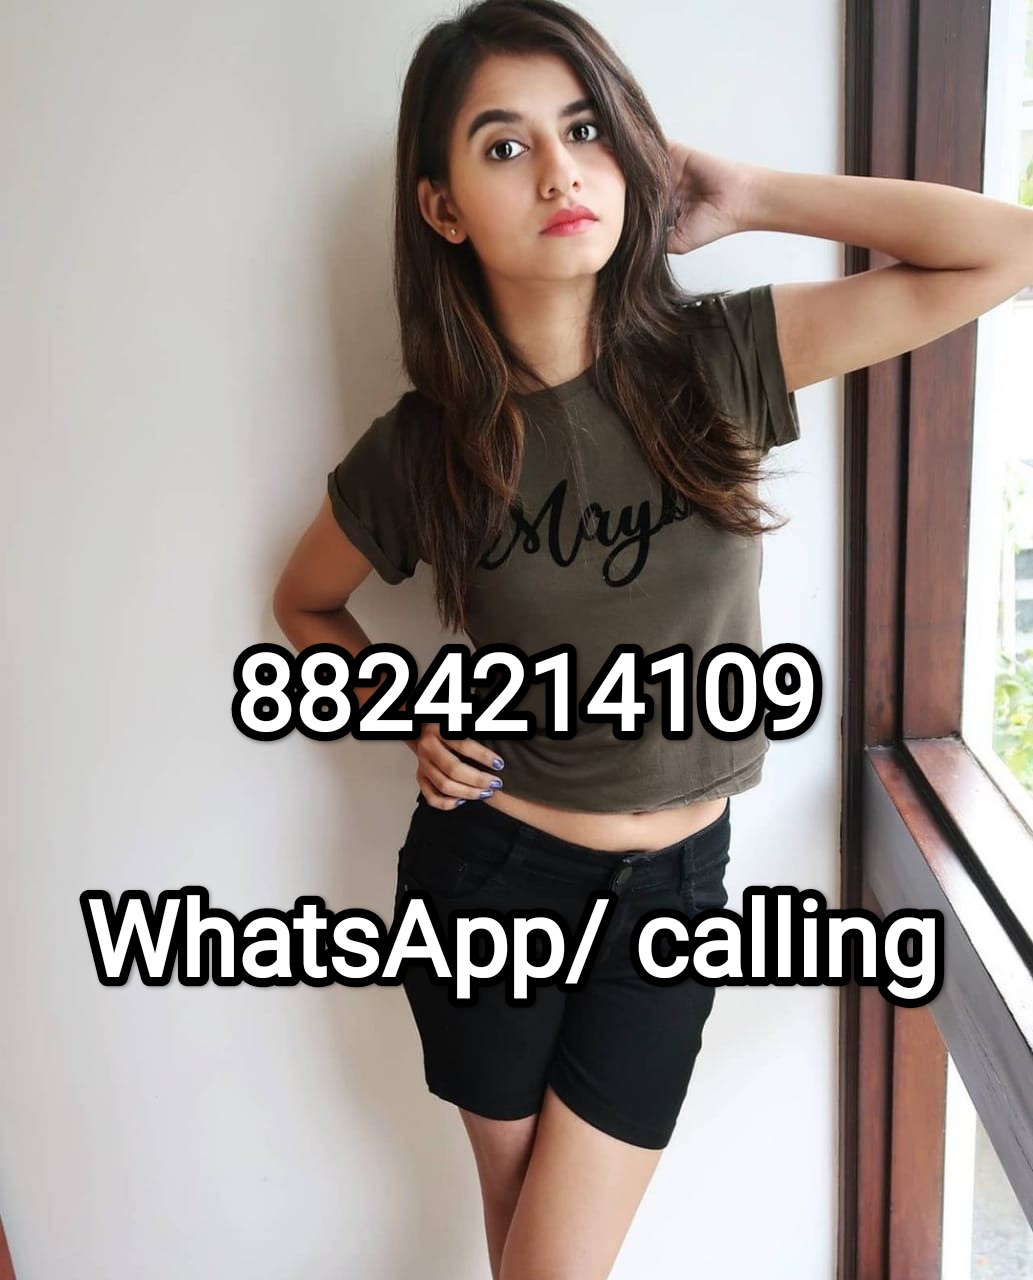 Coimbatore Tamil girl with Low price safe and satisfaction service 